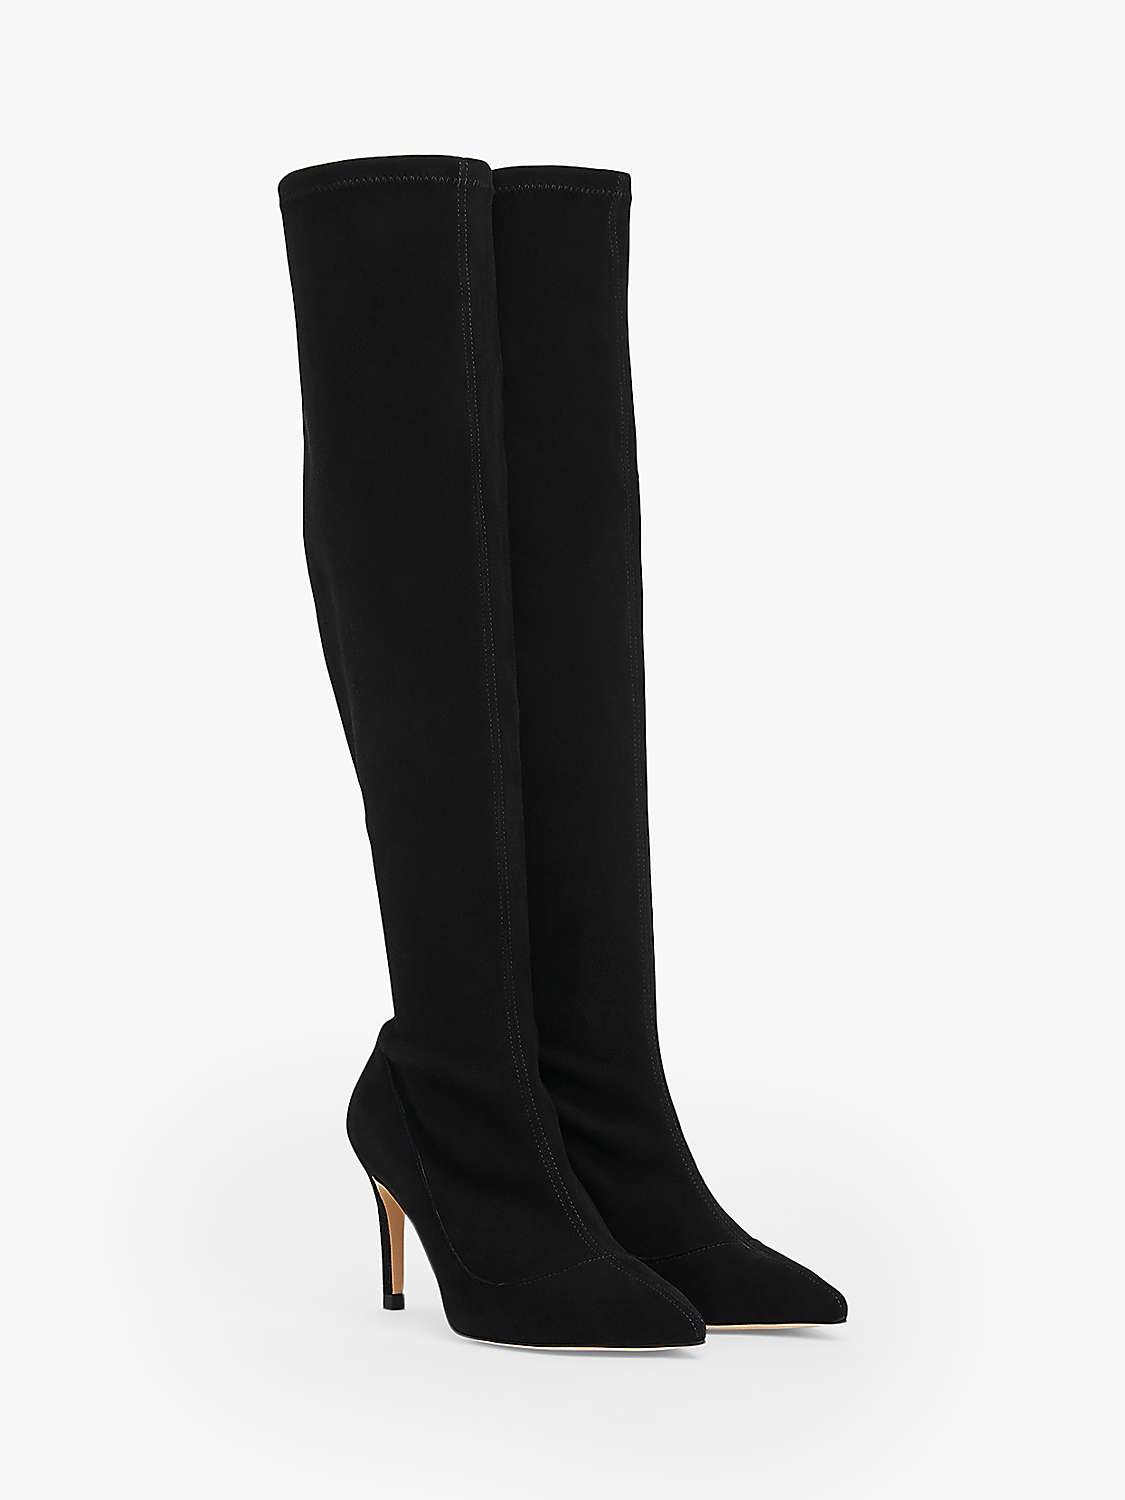 L.K.Bennett Blake Stretch Suede Over The Knee Boots, Black at John ...